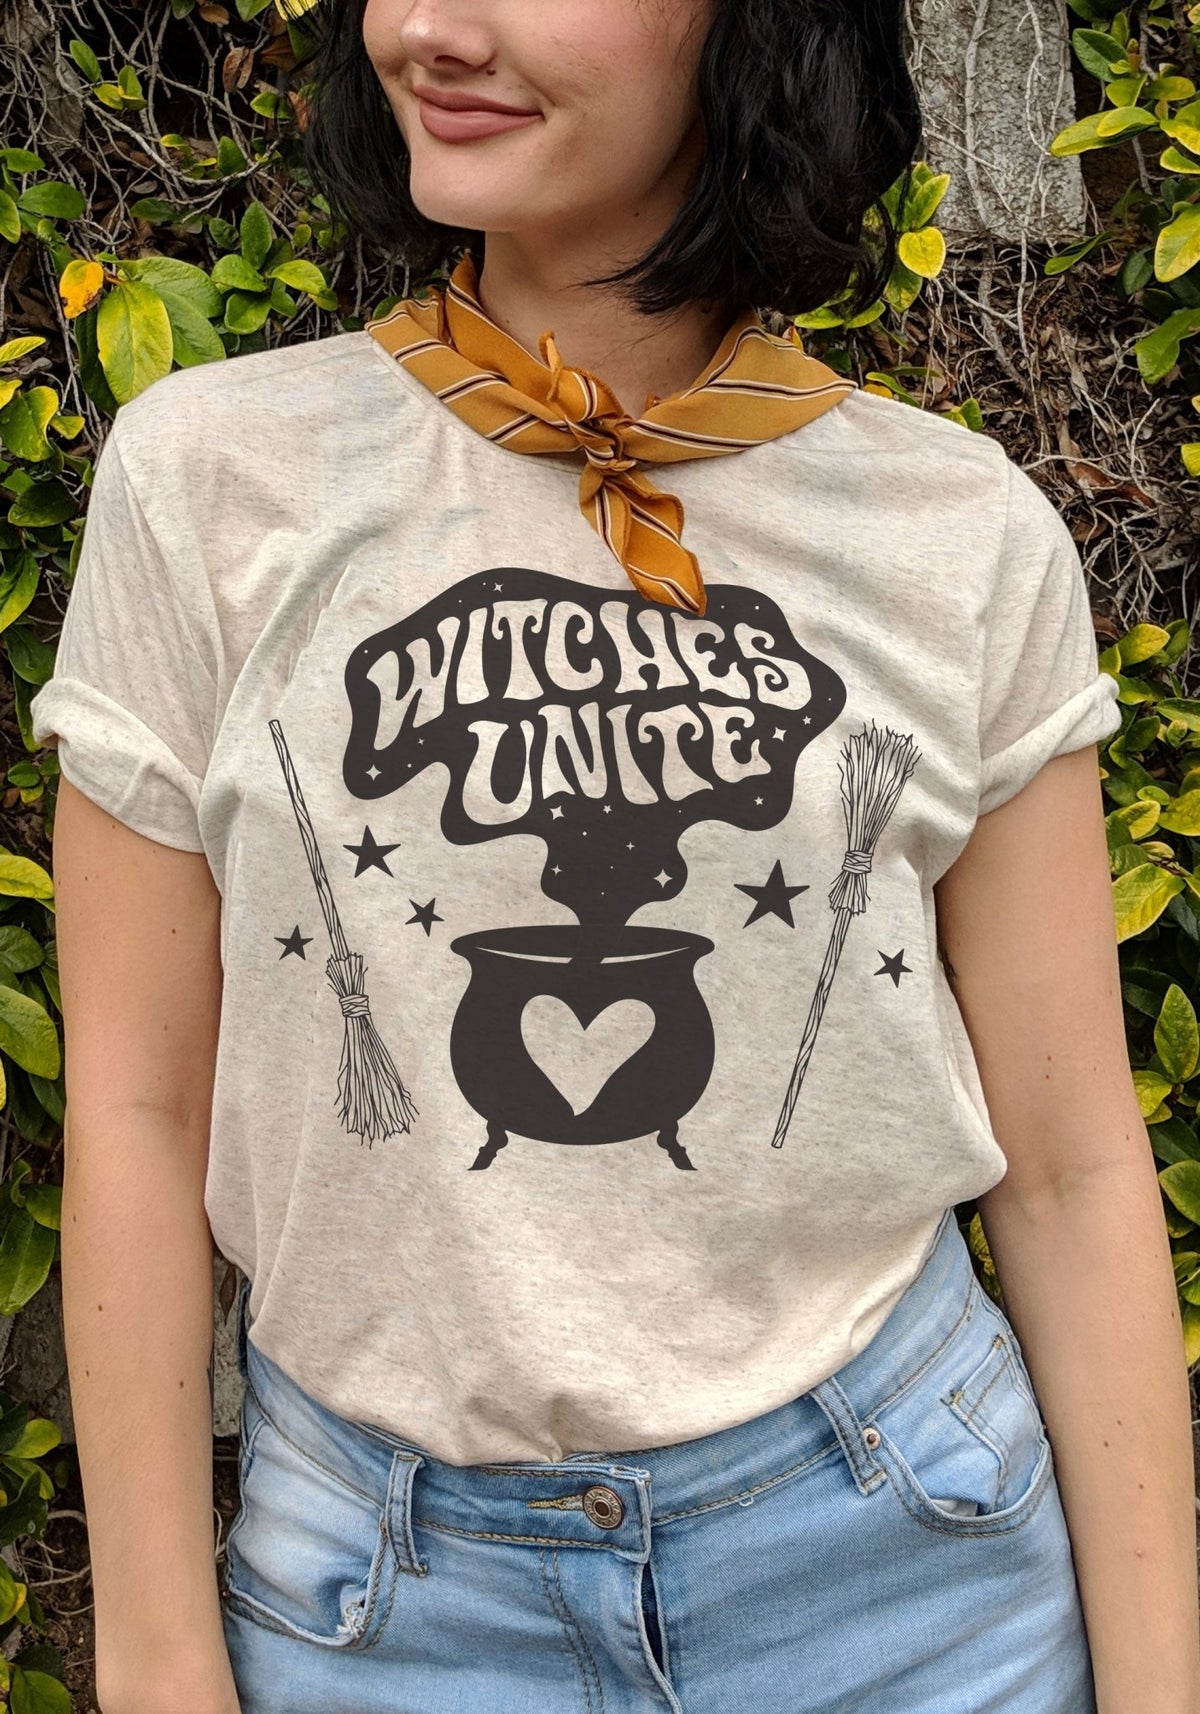 Witches Unite Tee by Toadstone Illustration 70s broom broomstick